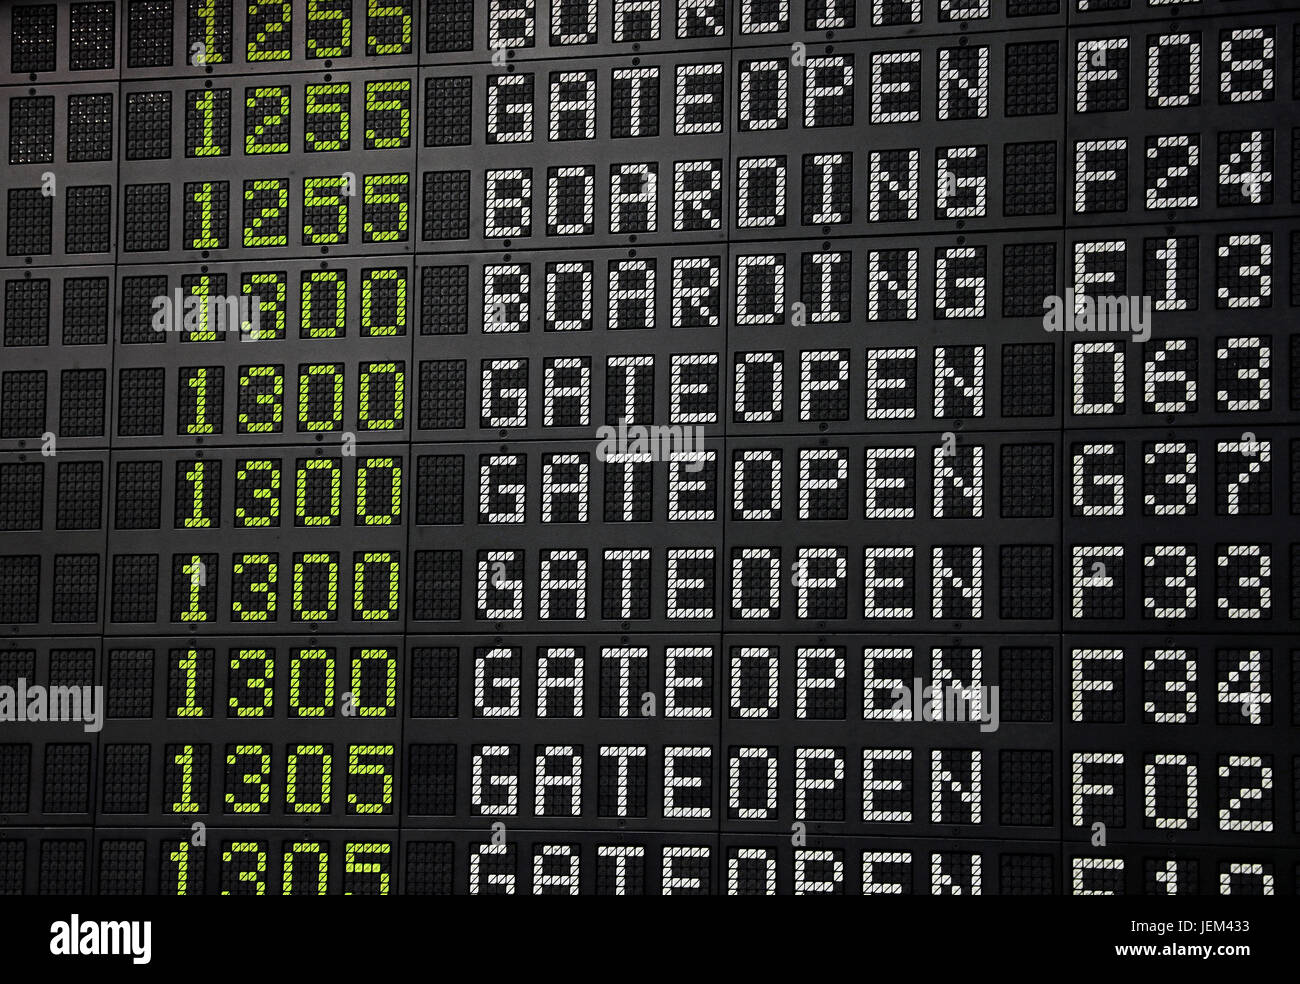 Flight information panel desk at airport, with time, flight number, boarding and gate open messages, close up, low angle view Stock Photo